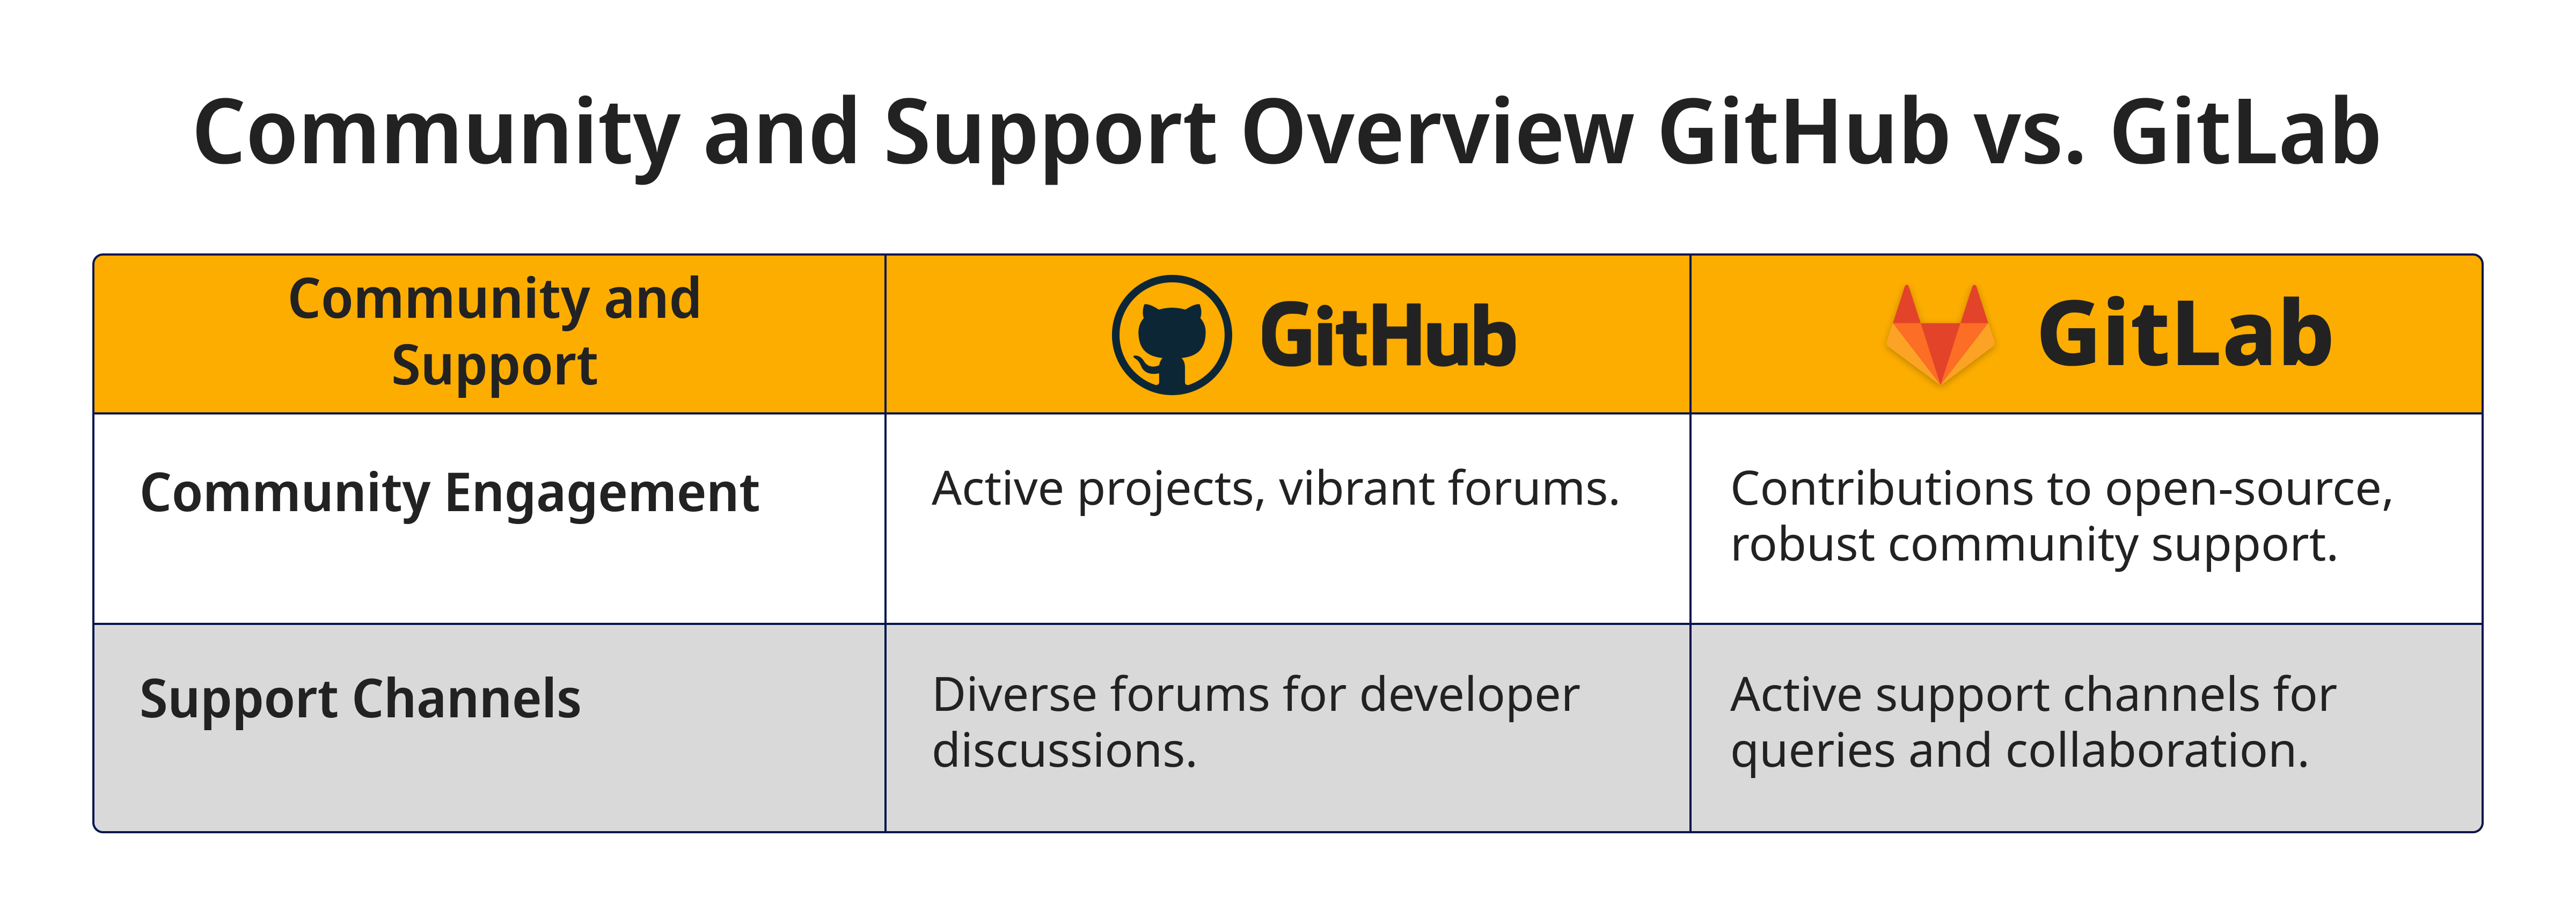 Community and Support Overview GitLab vs. GitHub